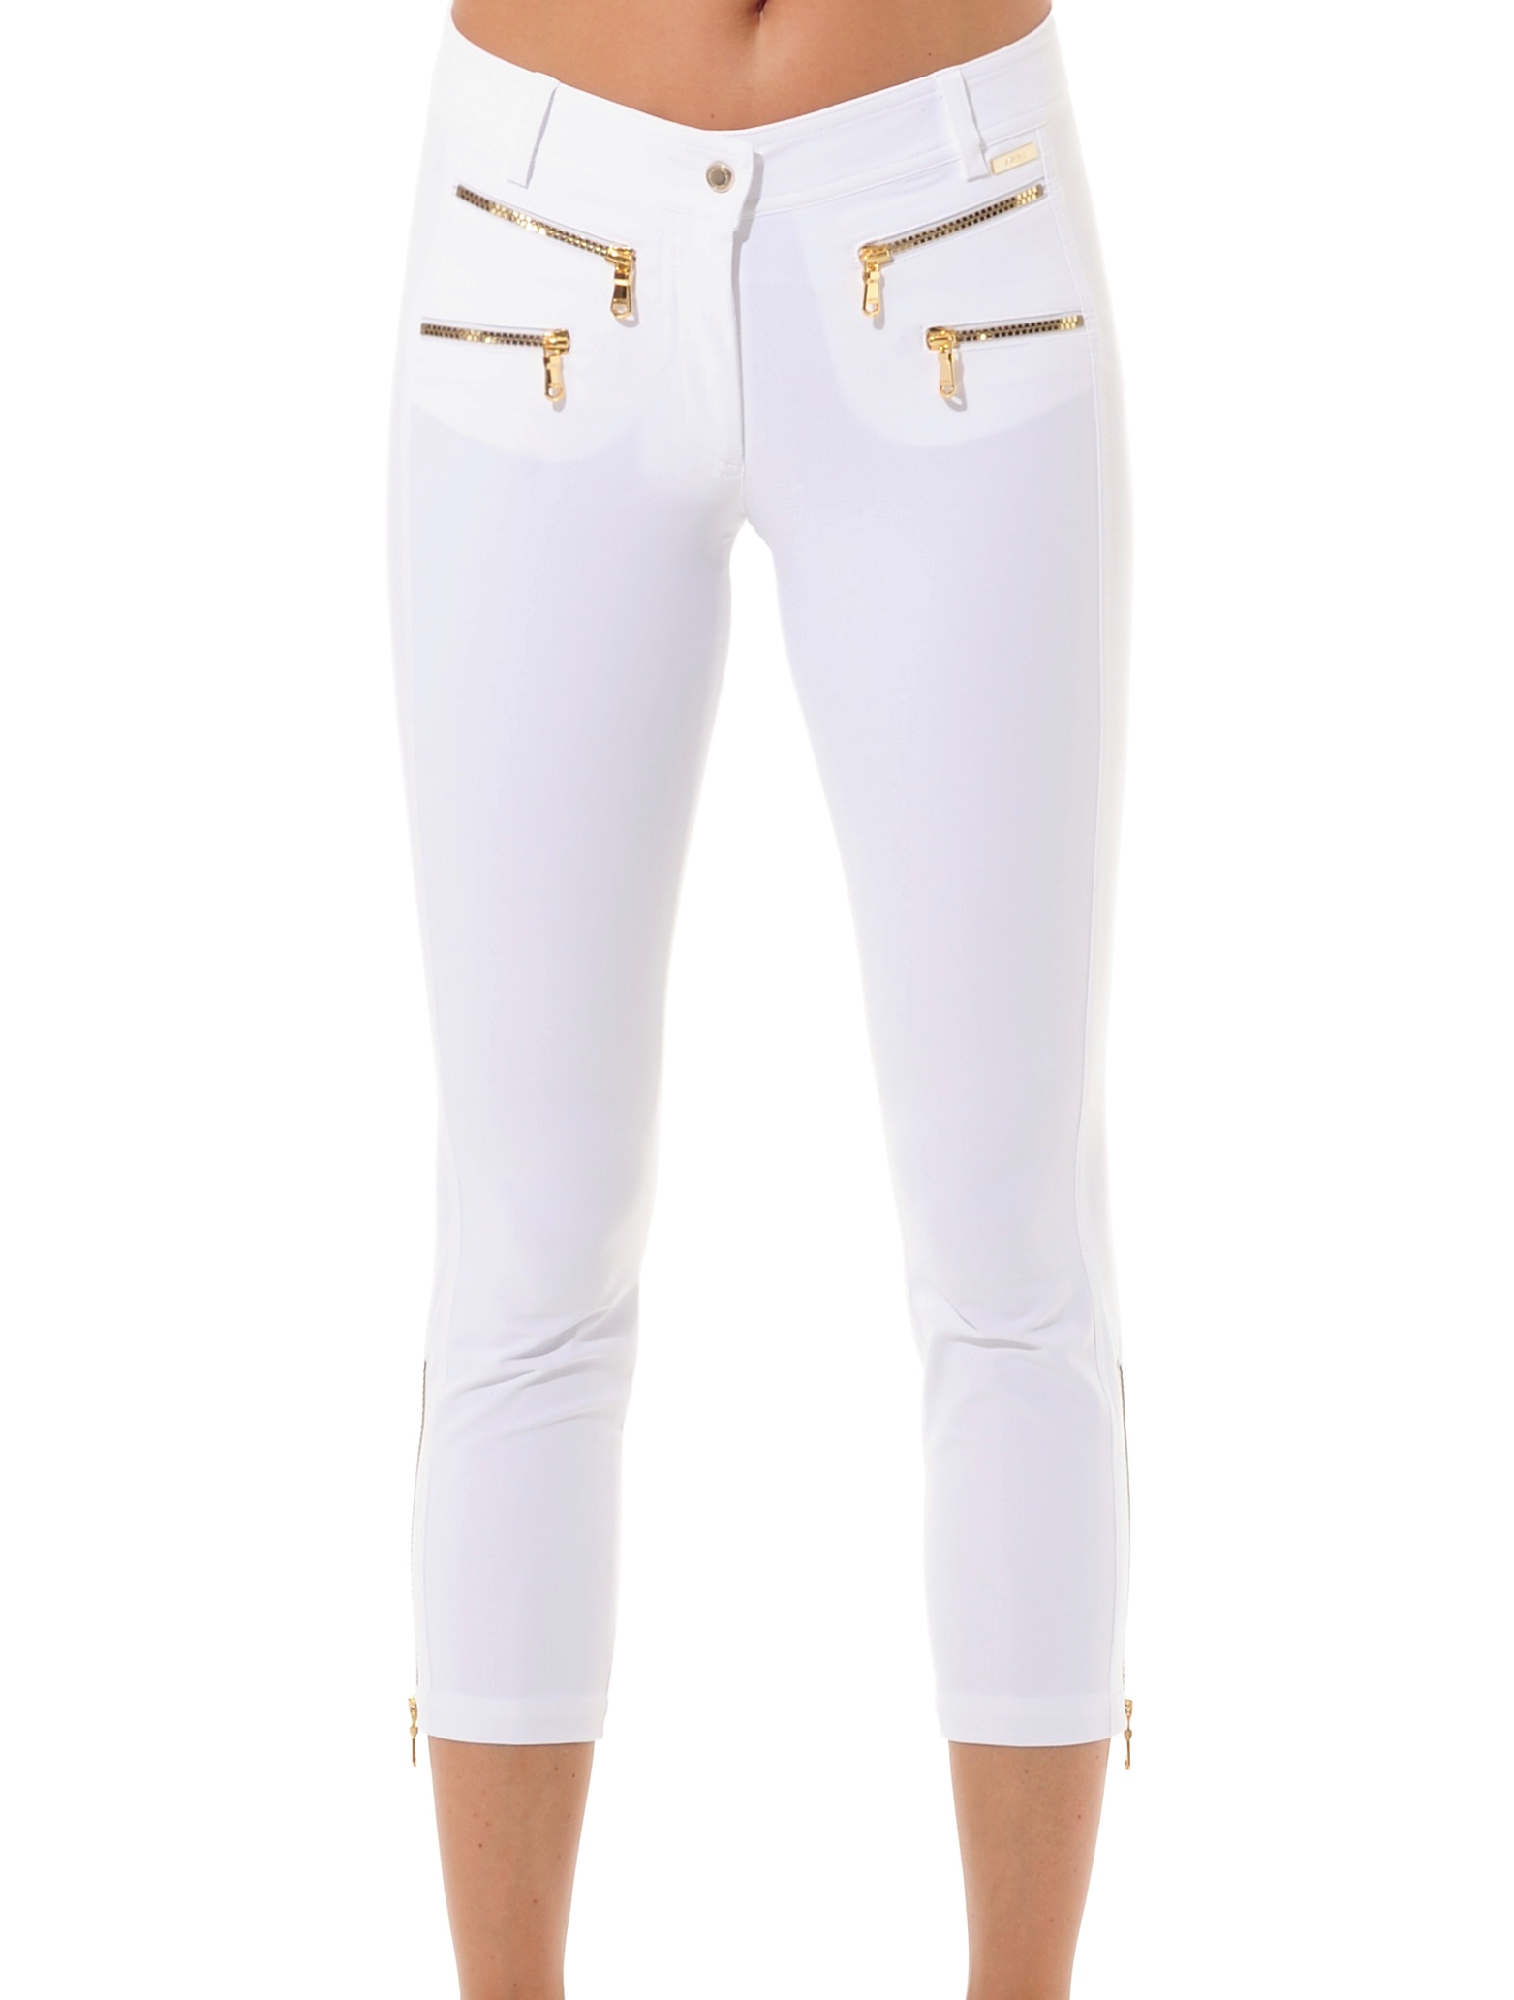 4way stretch shiny gold cube double zip cropped pants white 